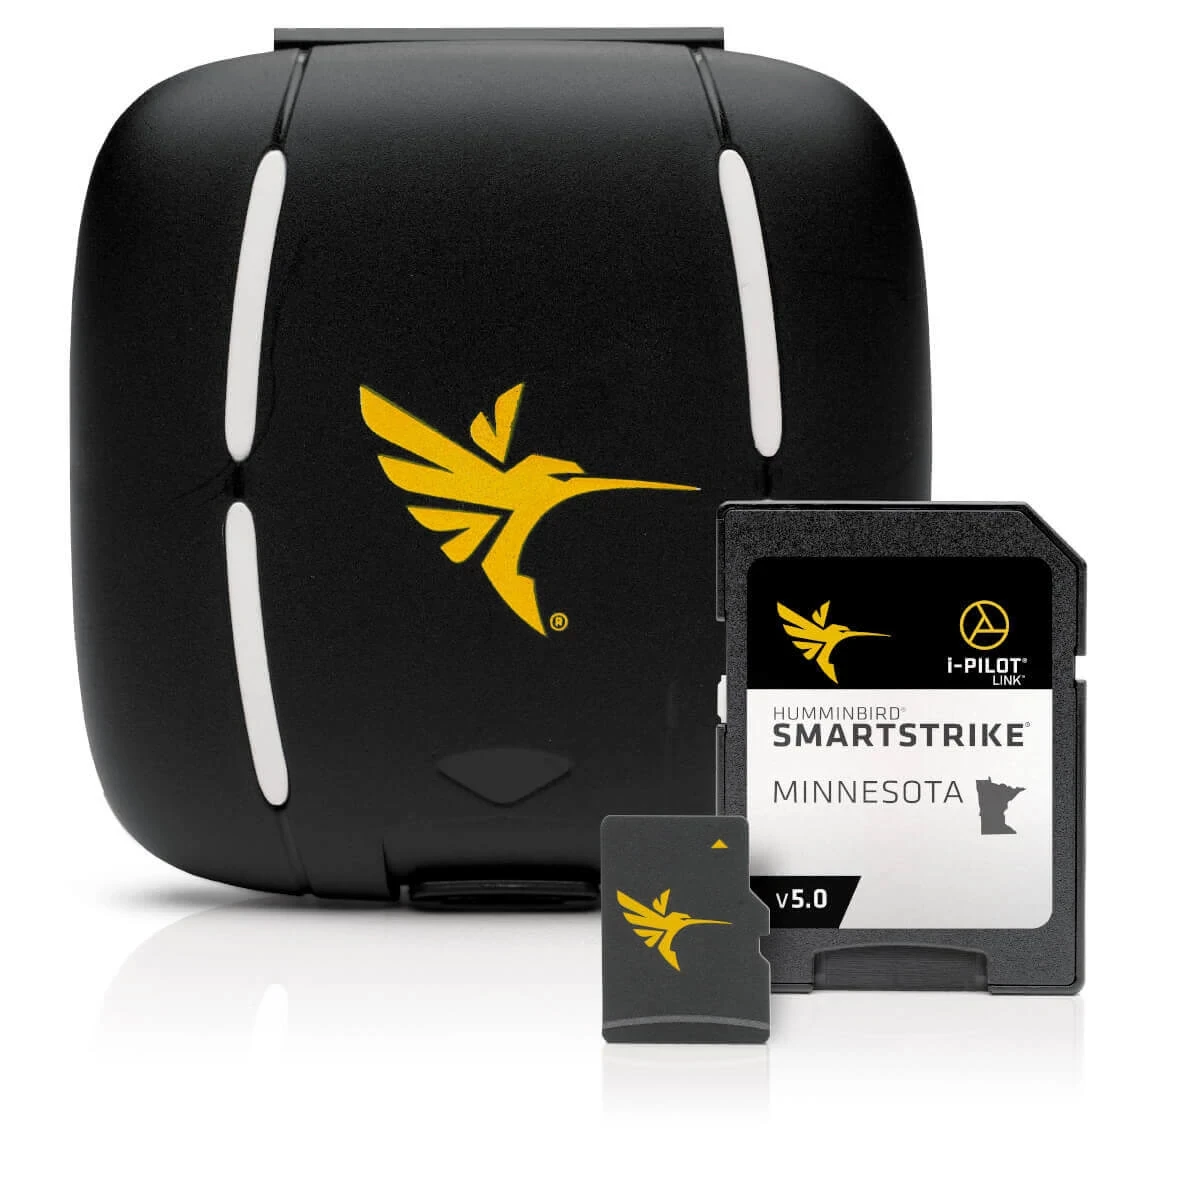 SmartStrike Minnesota v5 SD card with micro SD card and caboodle